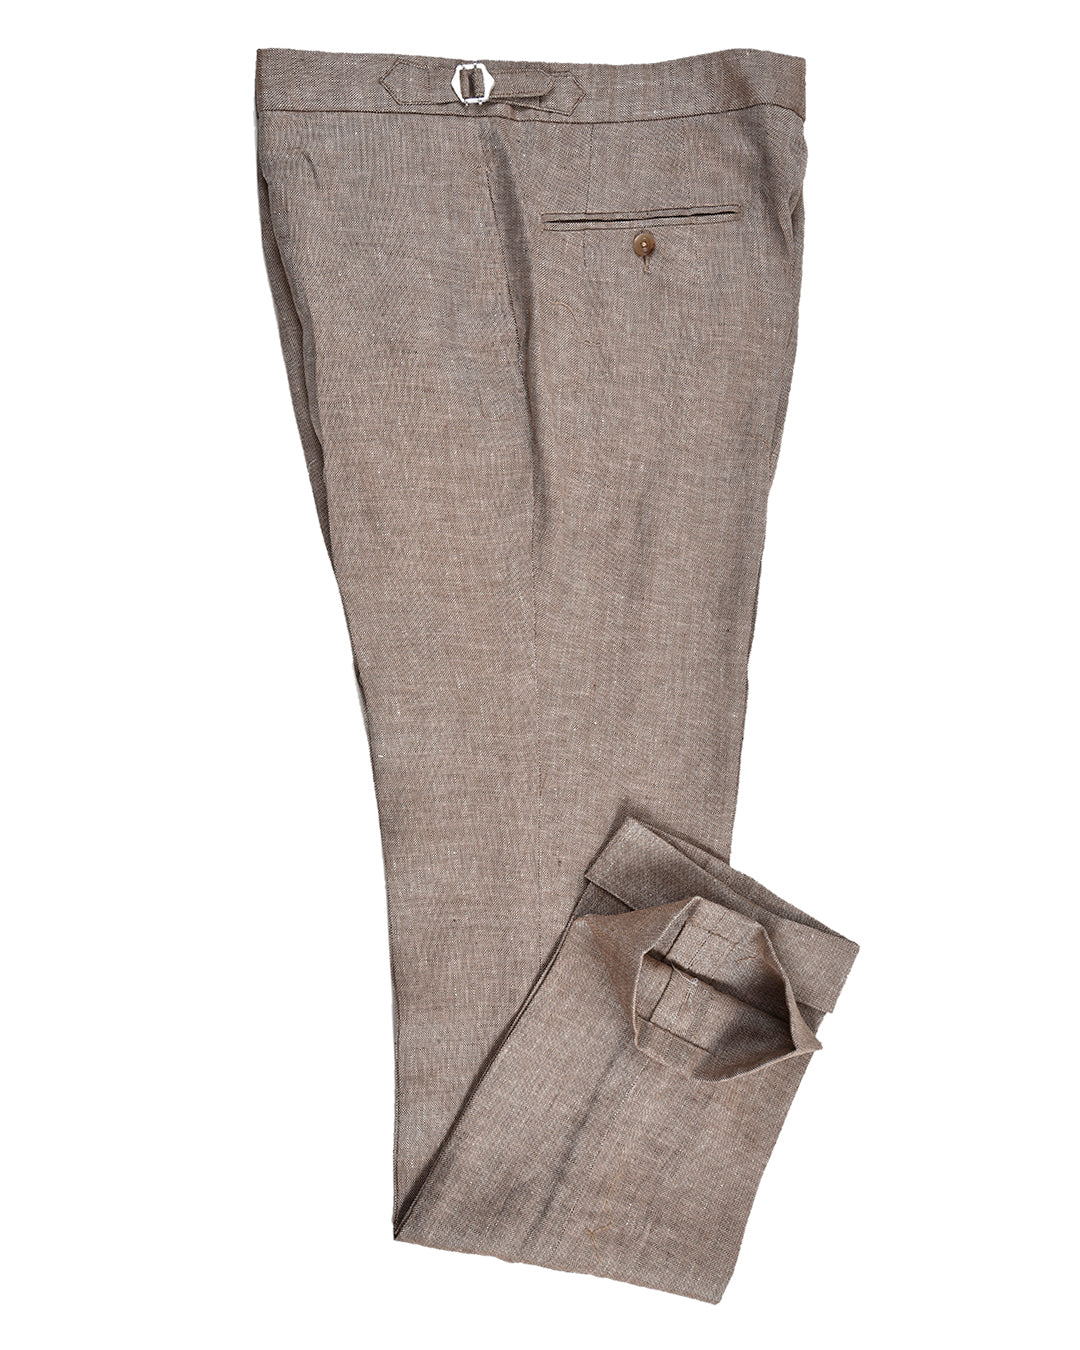 Side profile view of custom linen pants for men by Luxire in brown cream